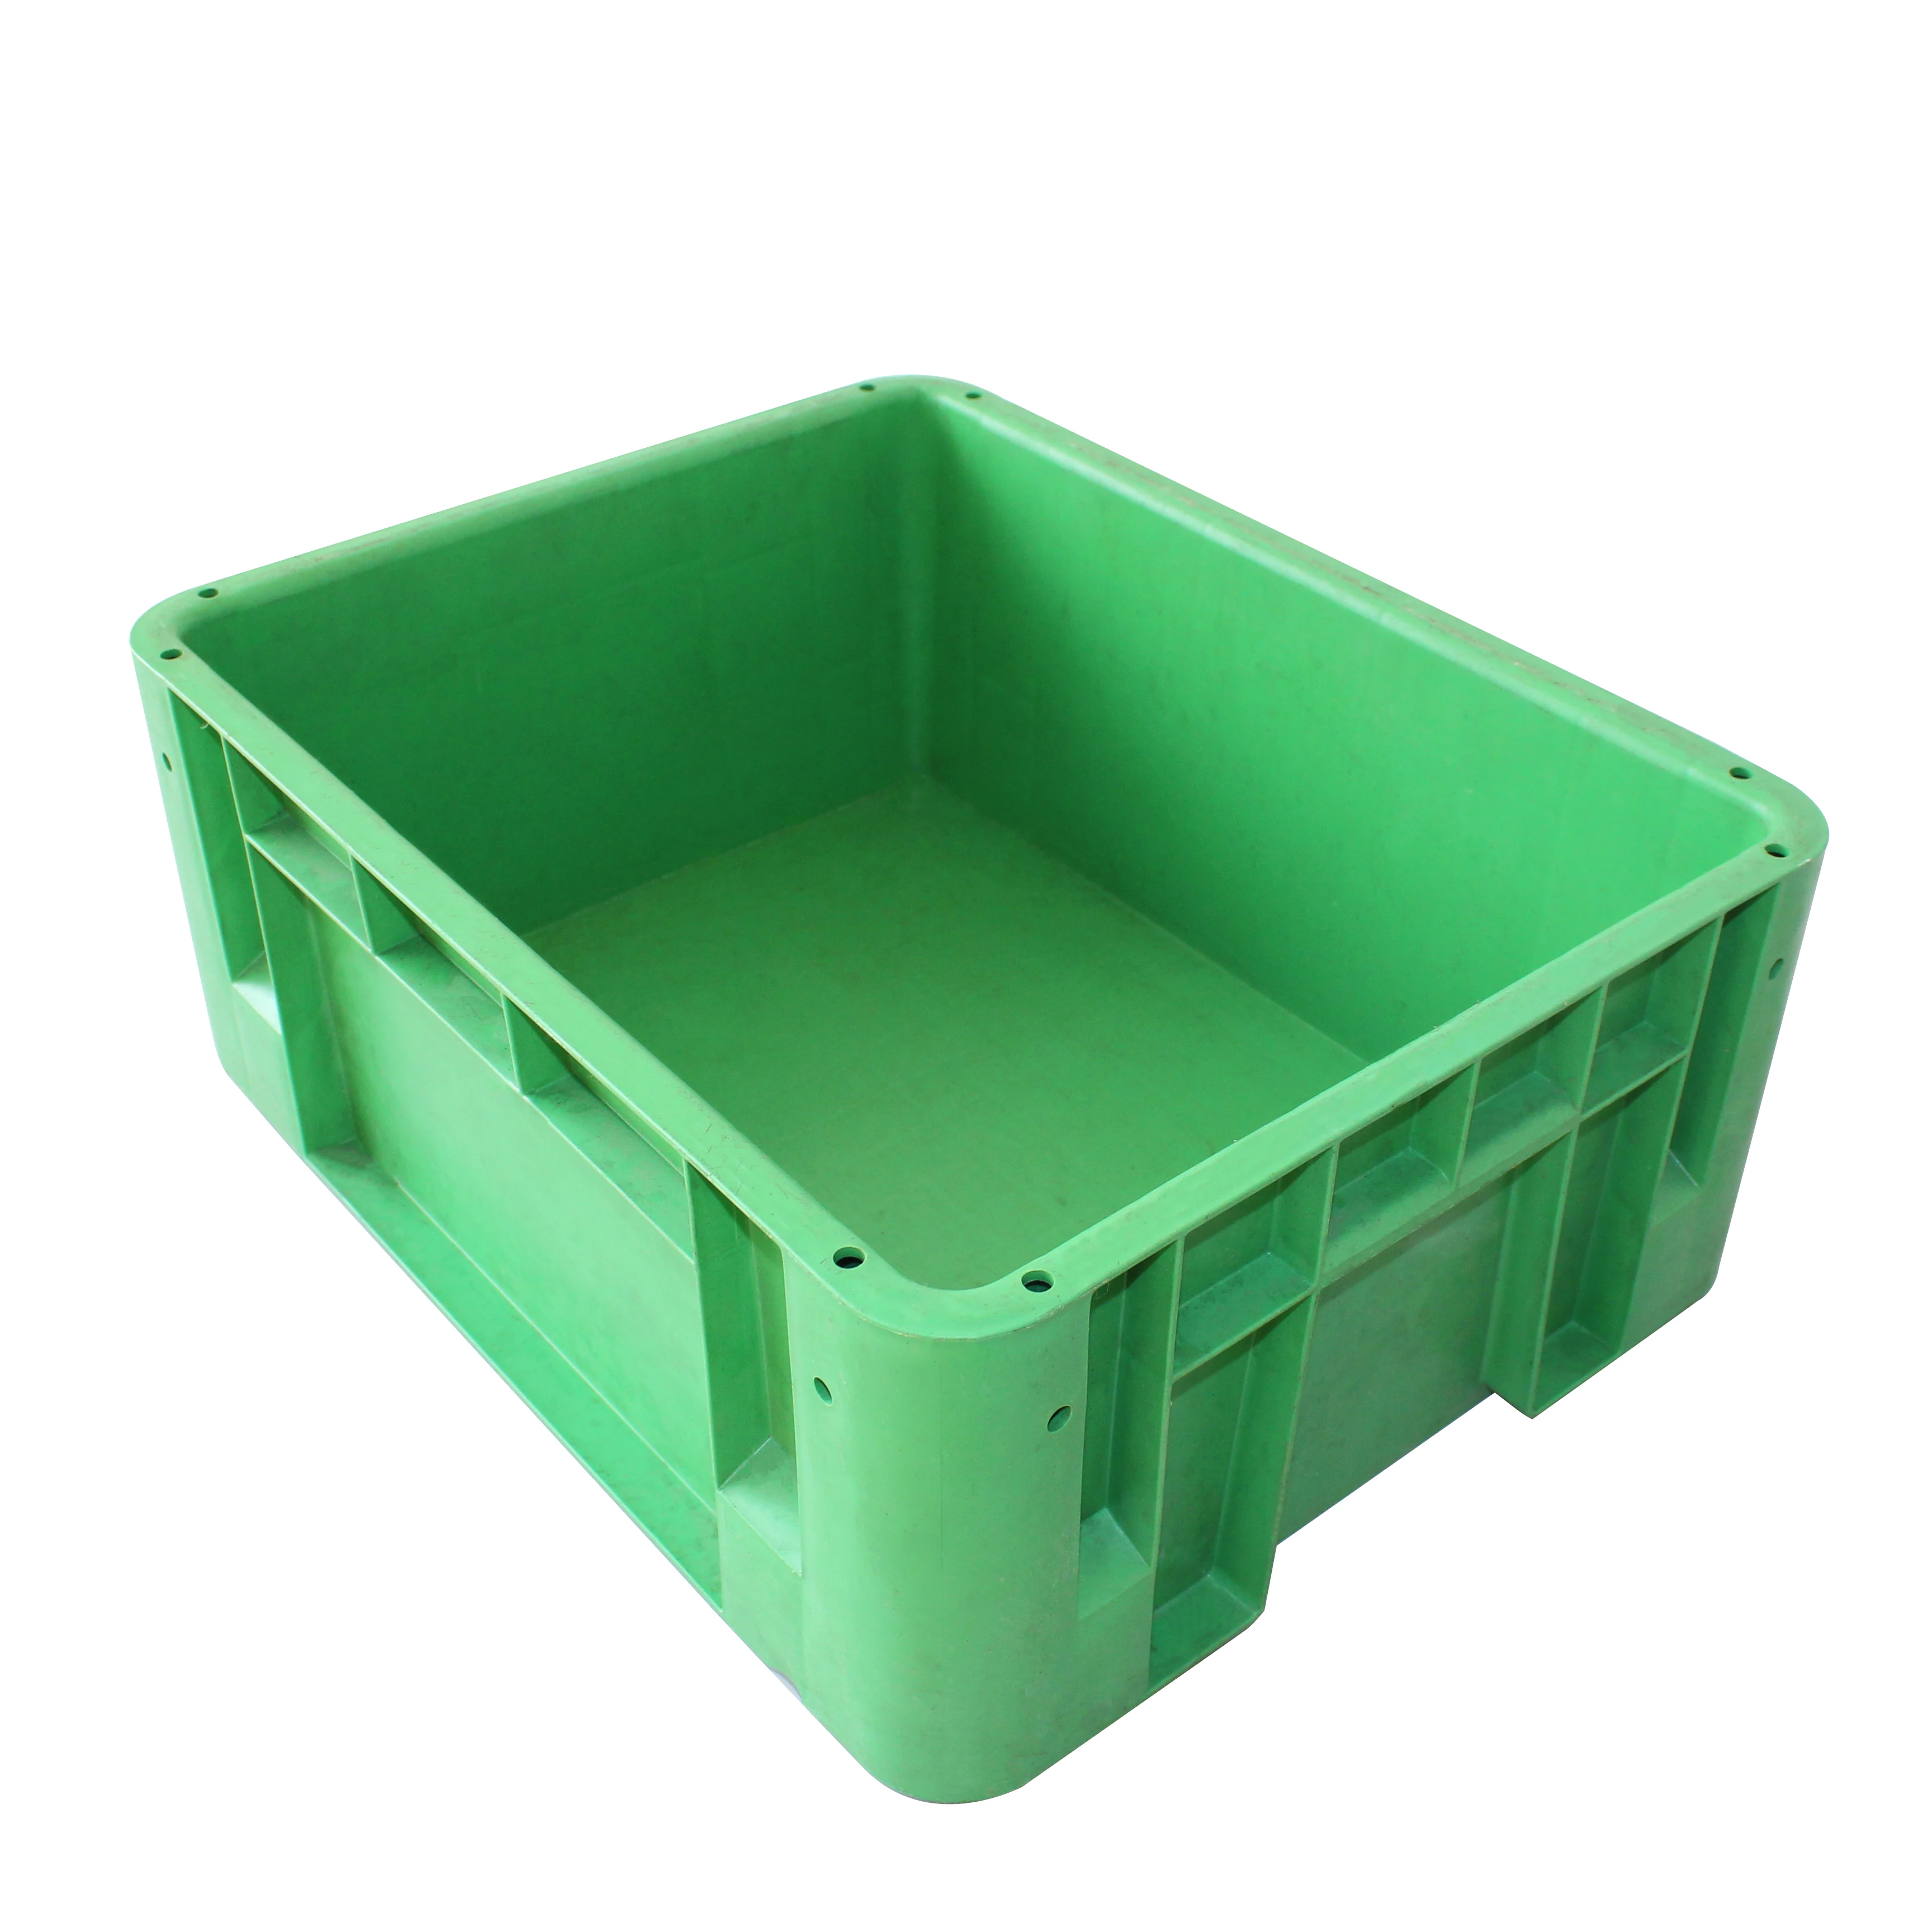 Plastic basket custom turnover box plastic red, green and blue express transit thickening logistics plastic factory mold opening